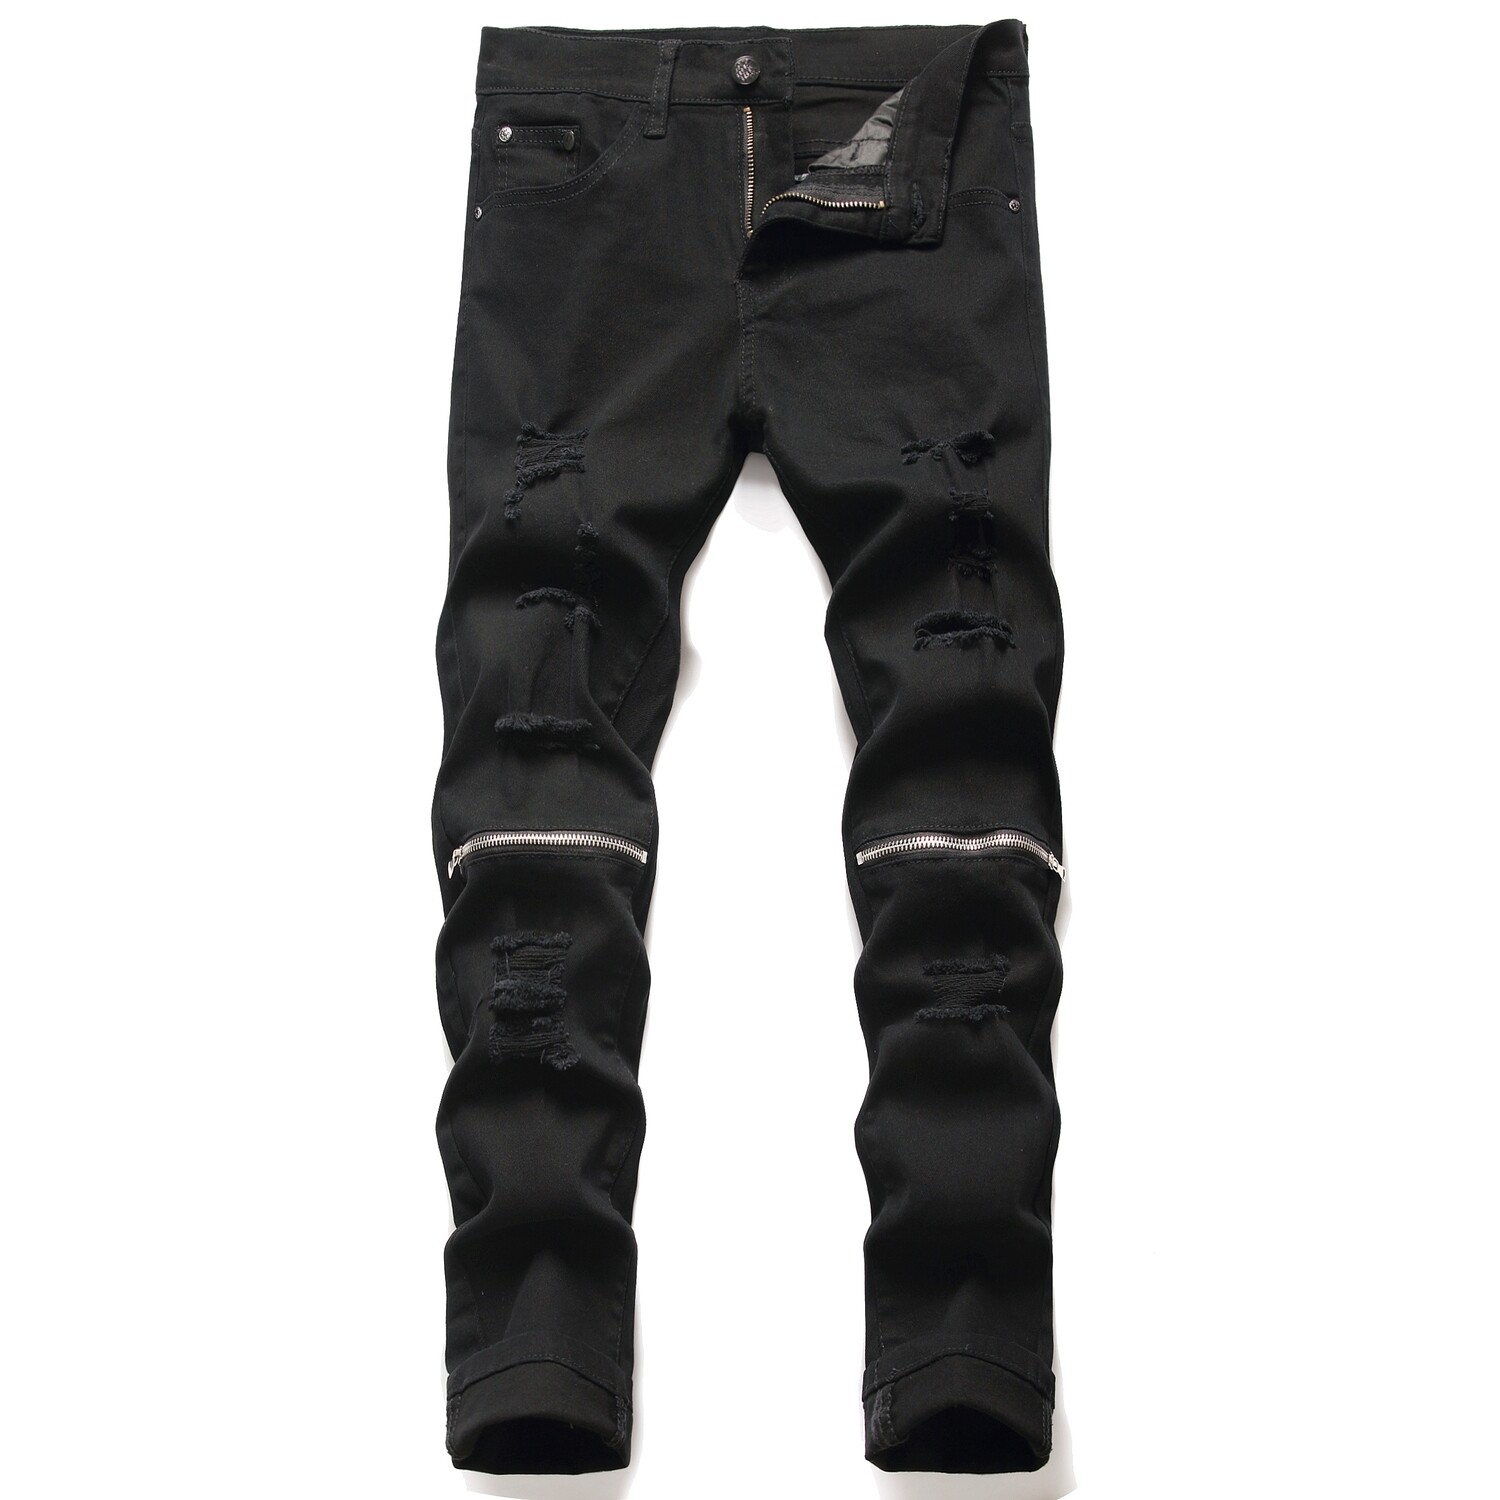 2022 Male Jeans Black Pants With Knee Zipper Hole Biker Jeans Men Brand Slim Straight Destroyed Torn Jean Pants For Male Homme